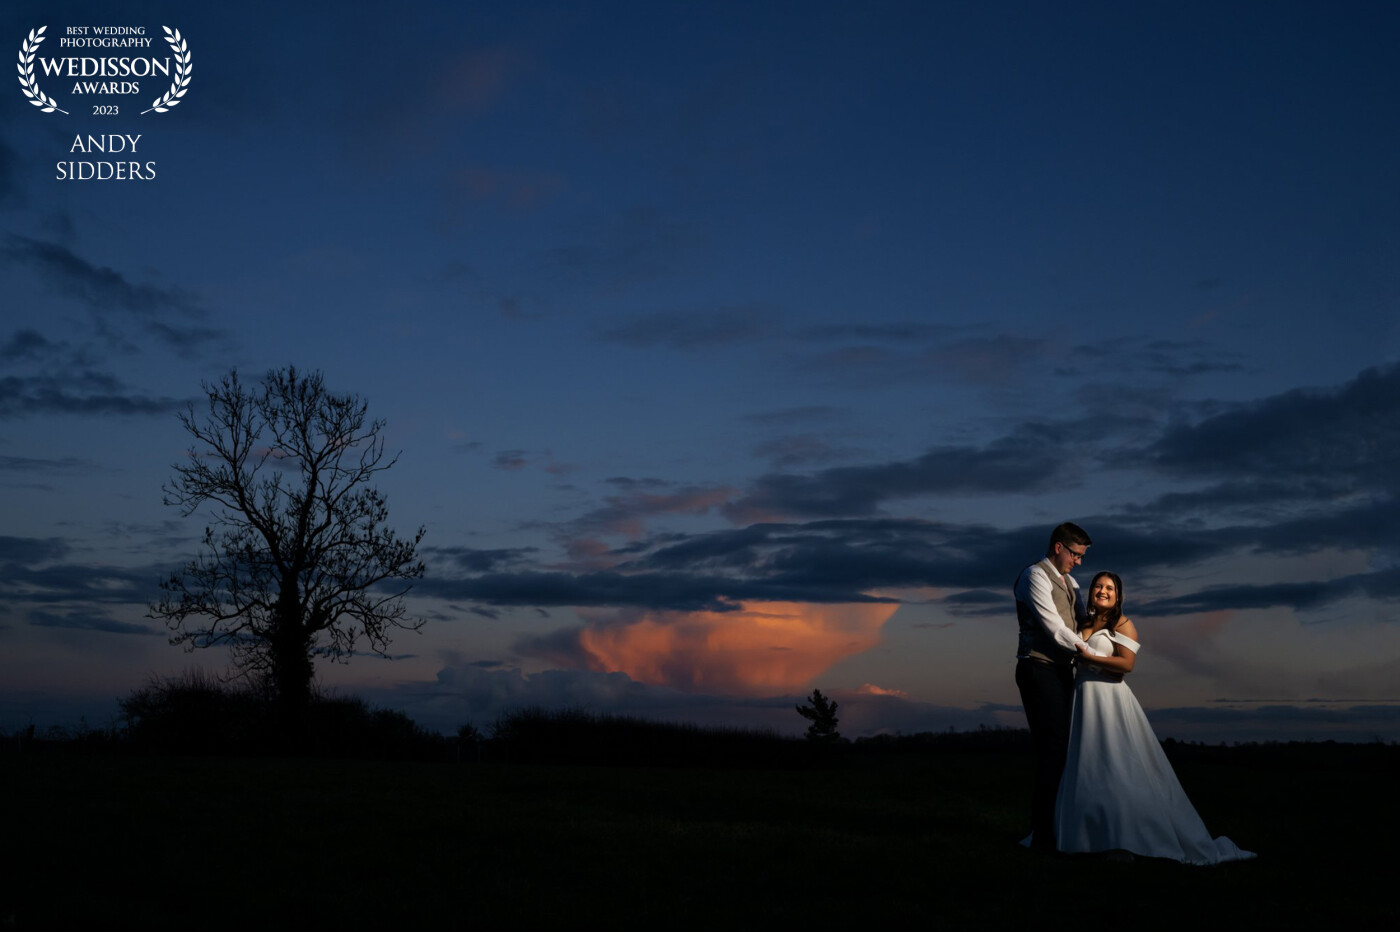 This photo was taken at Jess and Matt's wedding at Hunstmill Farm. There was a moody looking sunset, so I positioned the couple and then lit them with off camera flash.